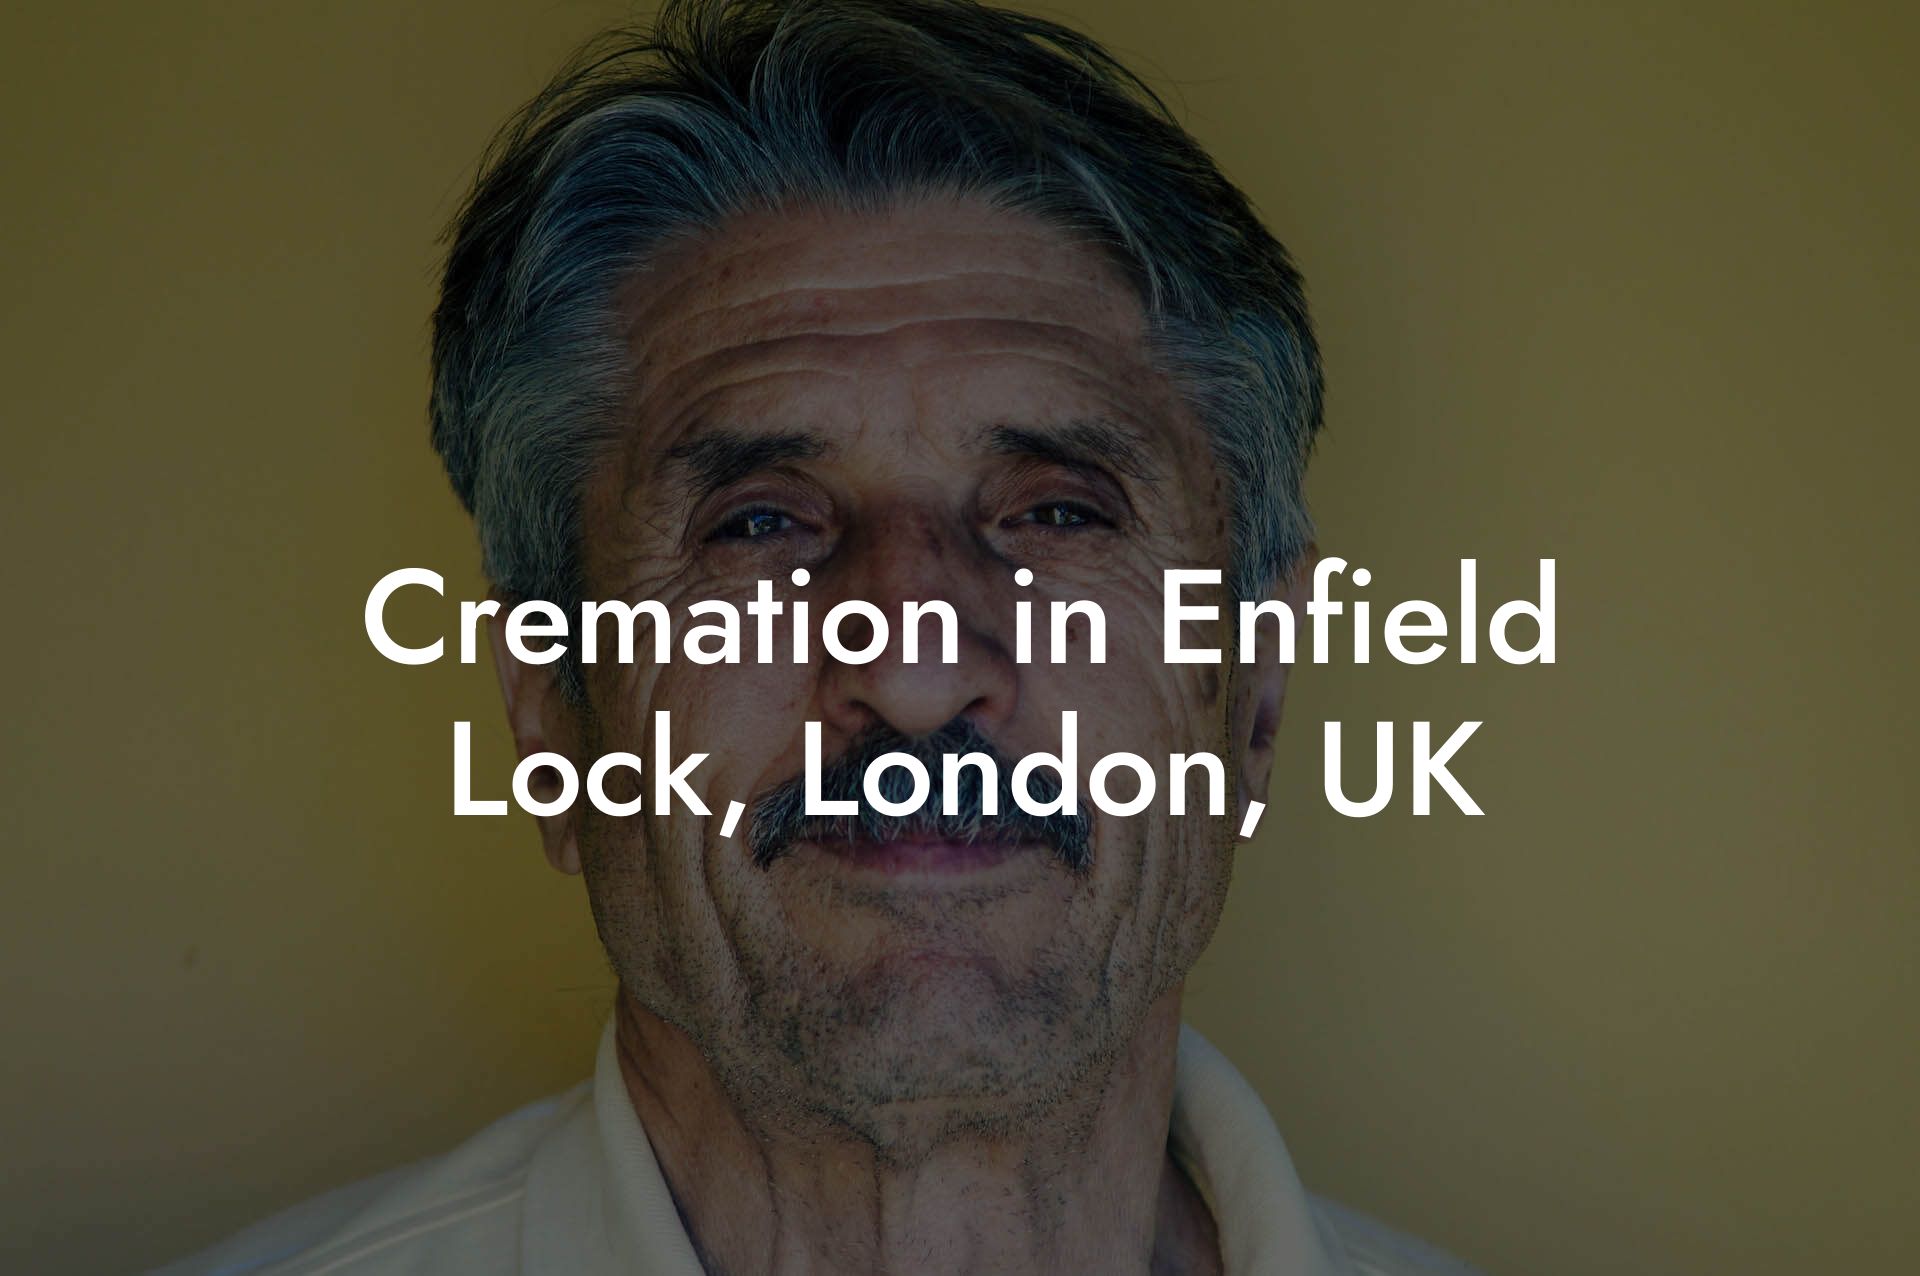 Cremation in Enfield Lock, London, UK